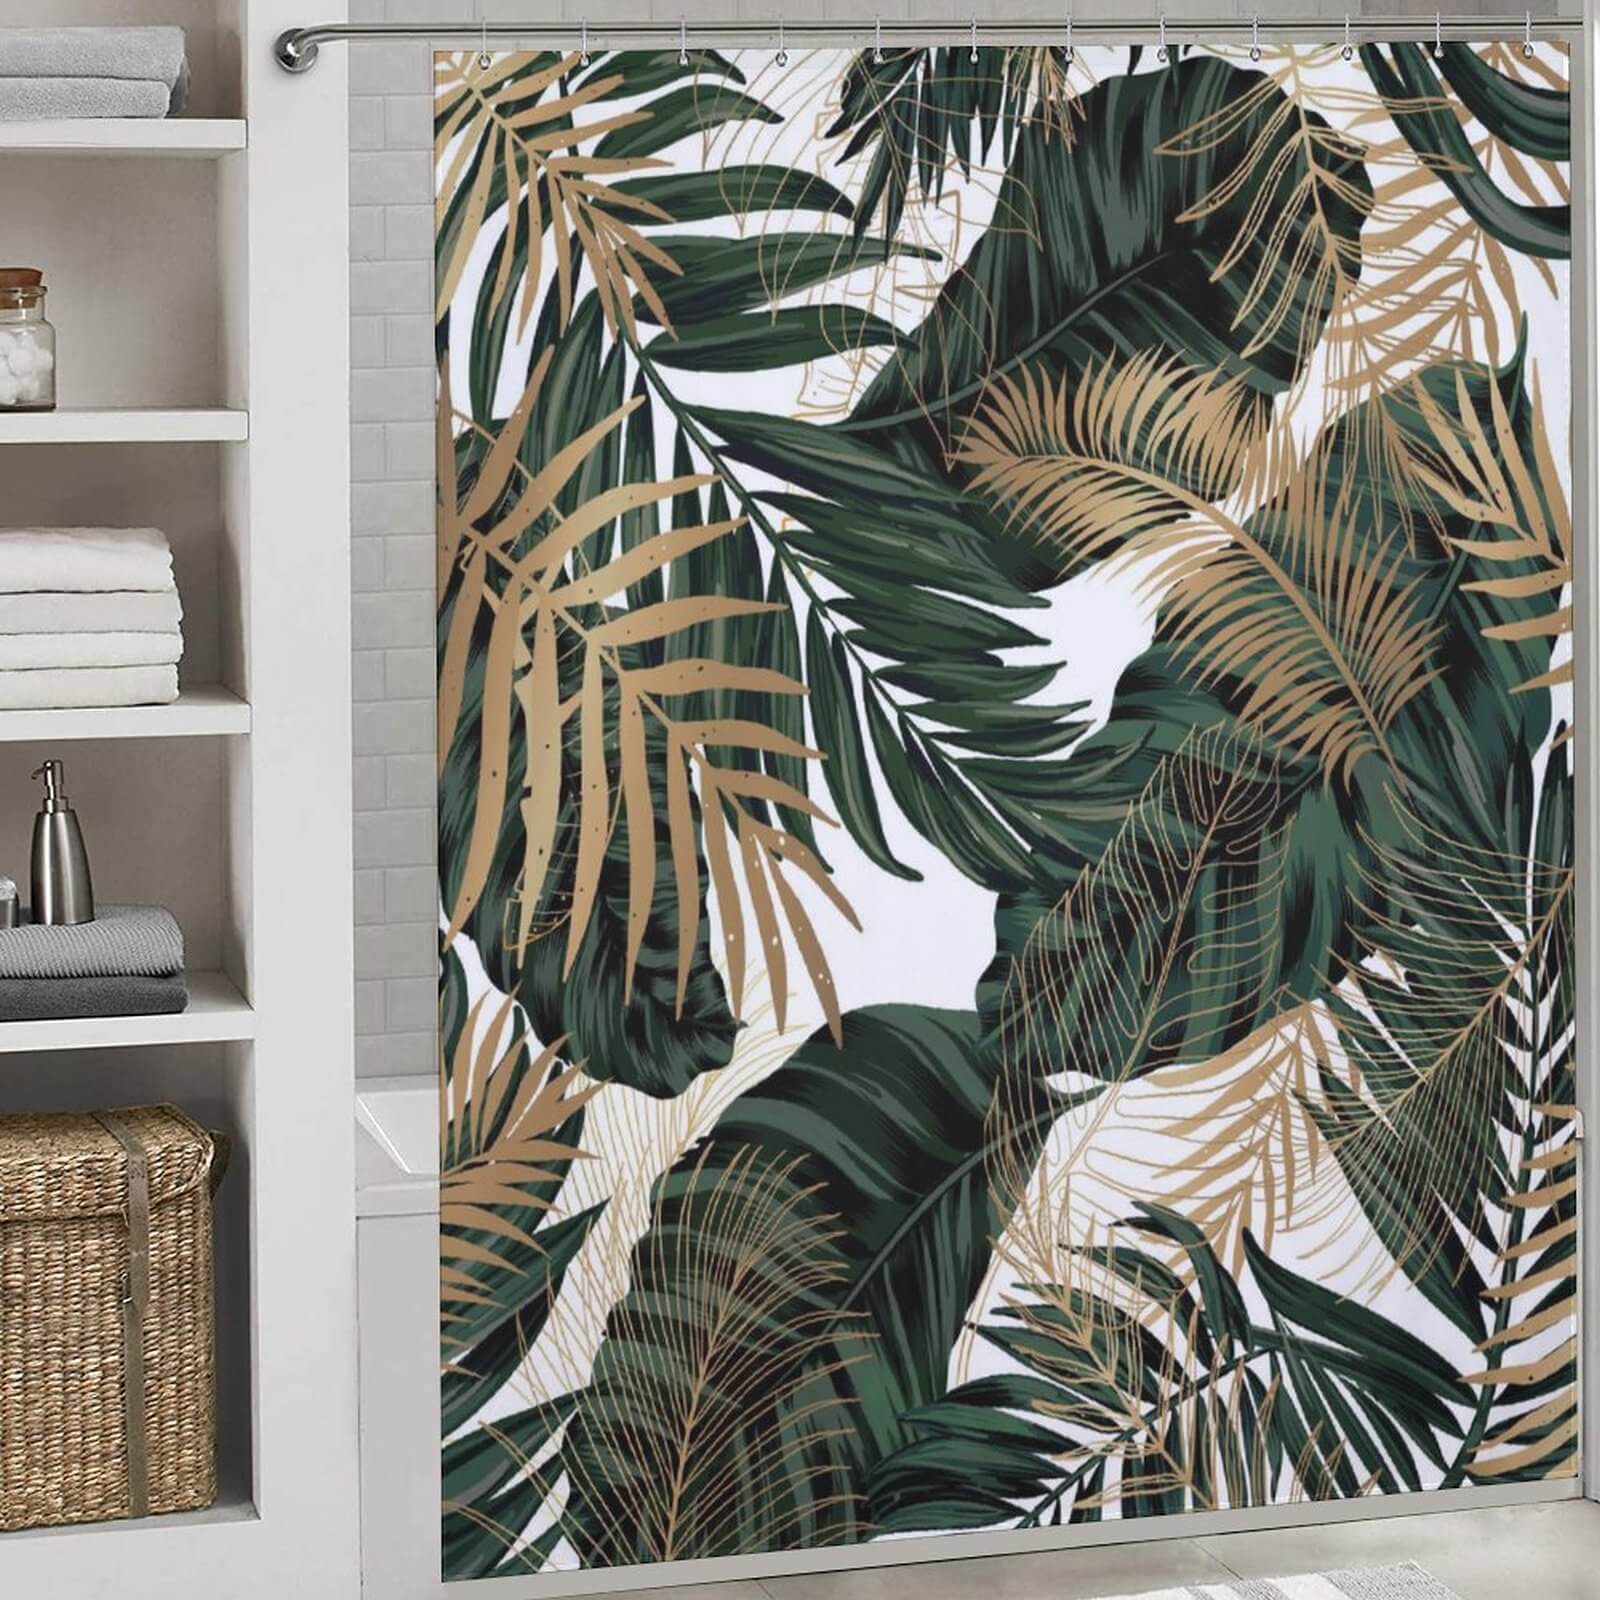 A Tropical Leaves Jungle Shower Curtain by Cotton Cat for bathroom decor.